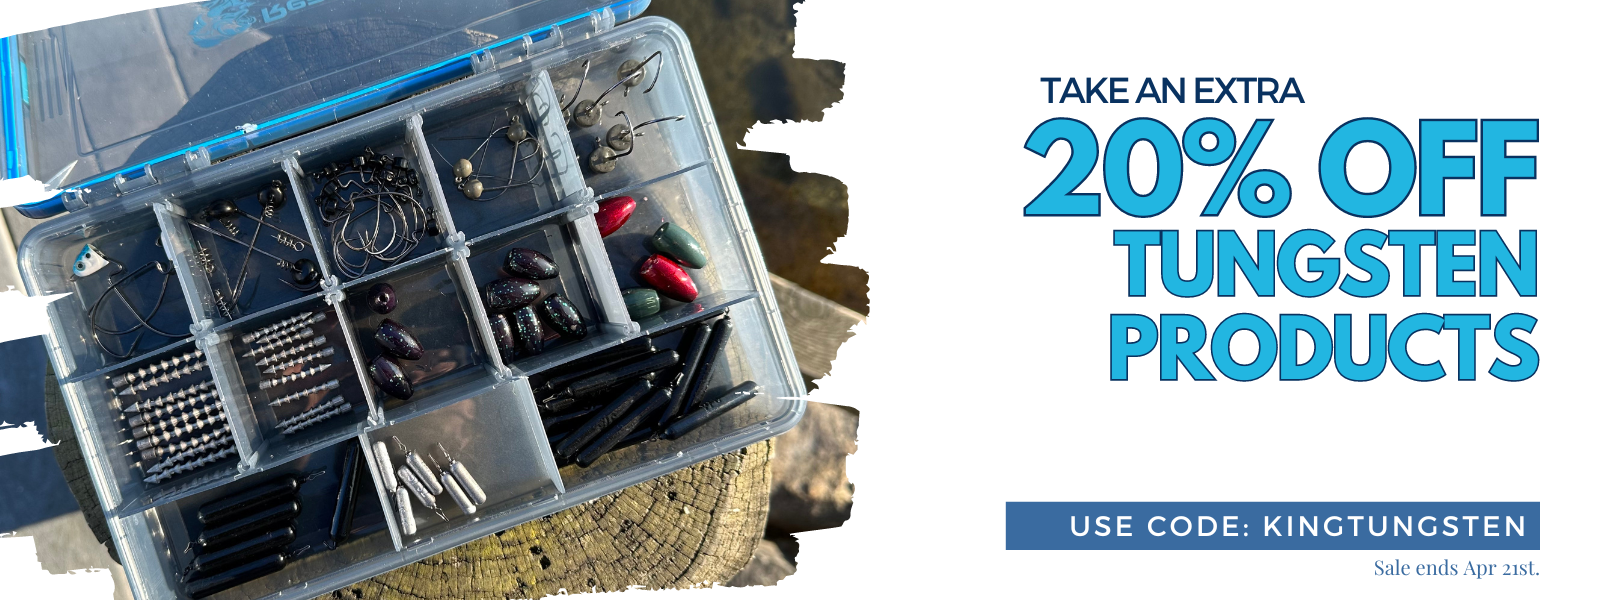 20% off all tungsten products. use code KINGTUNGSTEN. Ends apt 21st.